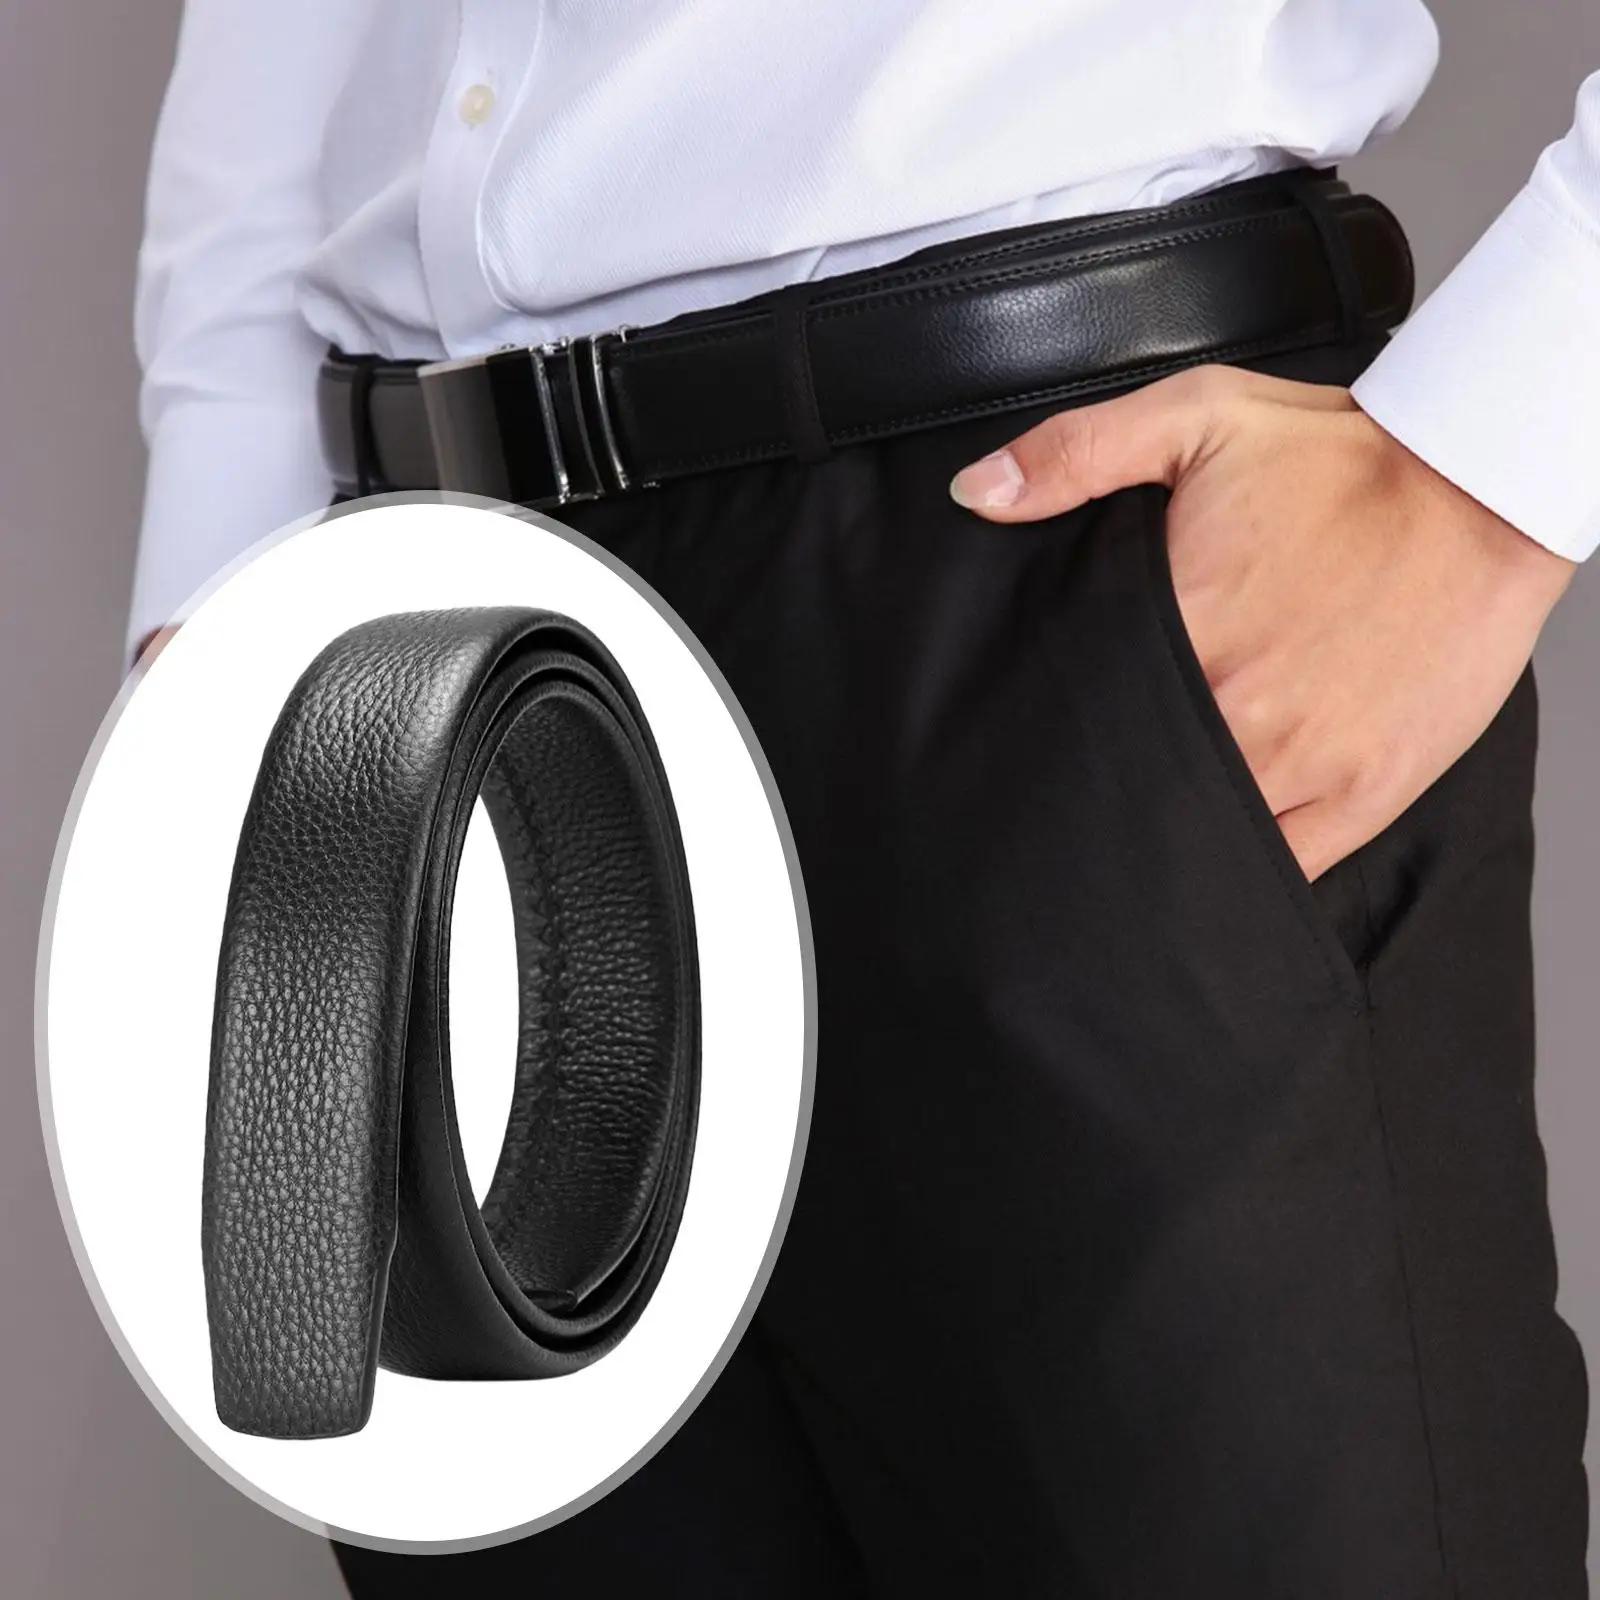 Belt Strap Replacement Ratchet Belt Strap Only Versatile Costume Accessories for Shopping Everyday Wear Dating Suit Pants